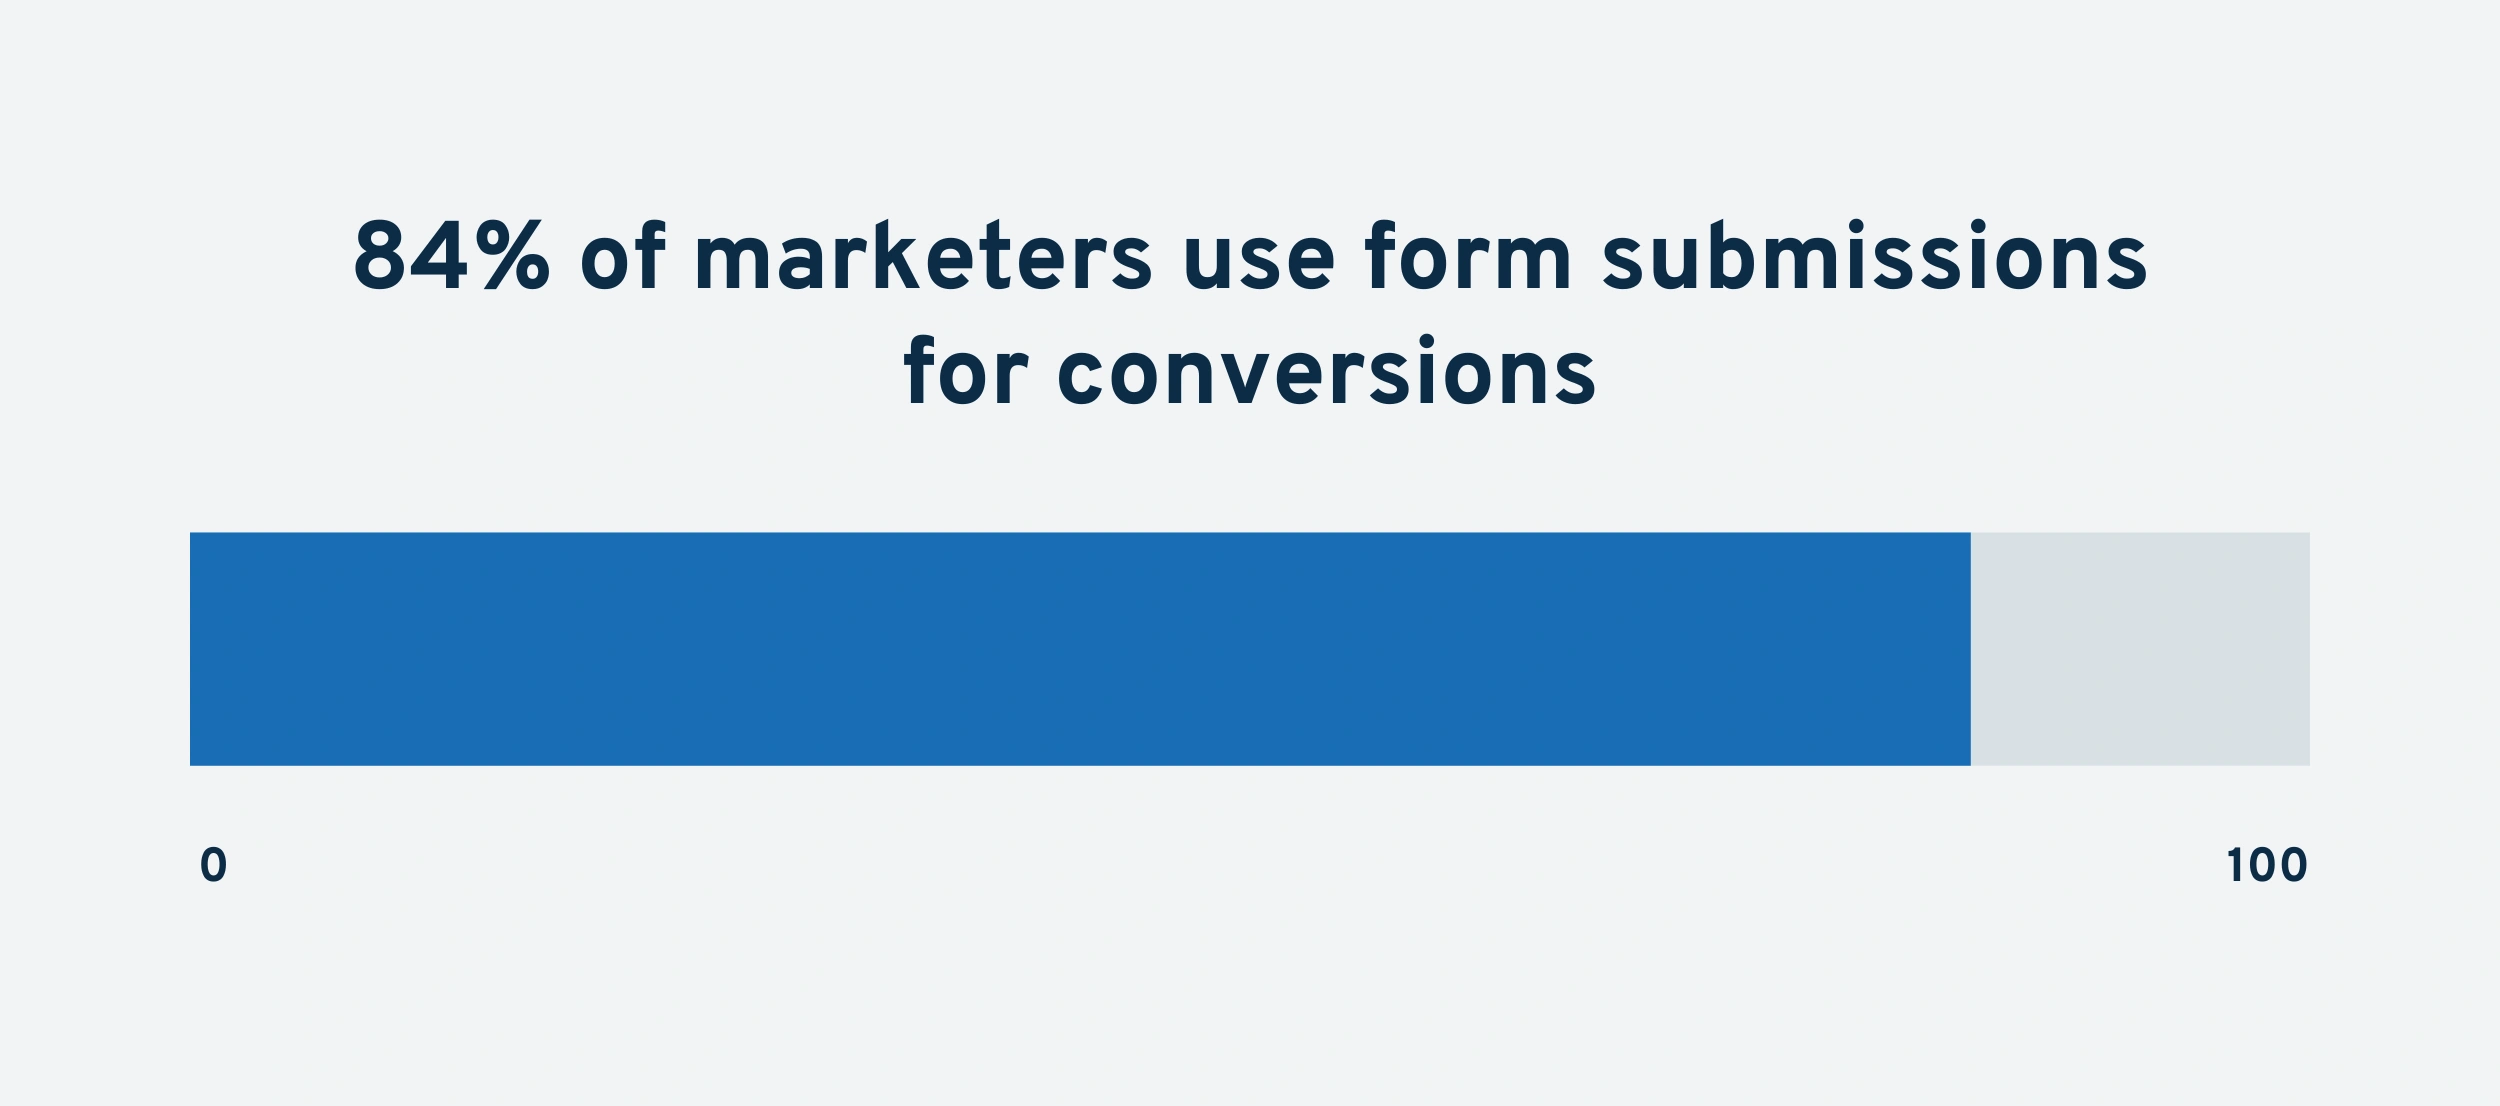 form-submissions-for-conversions-min.png